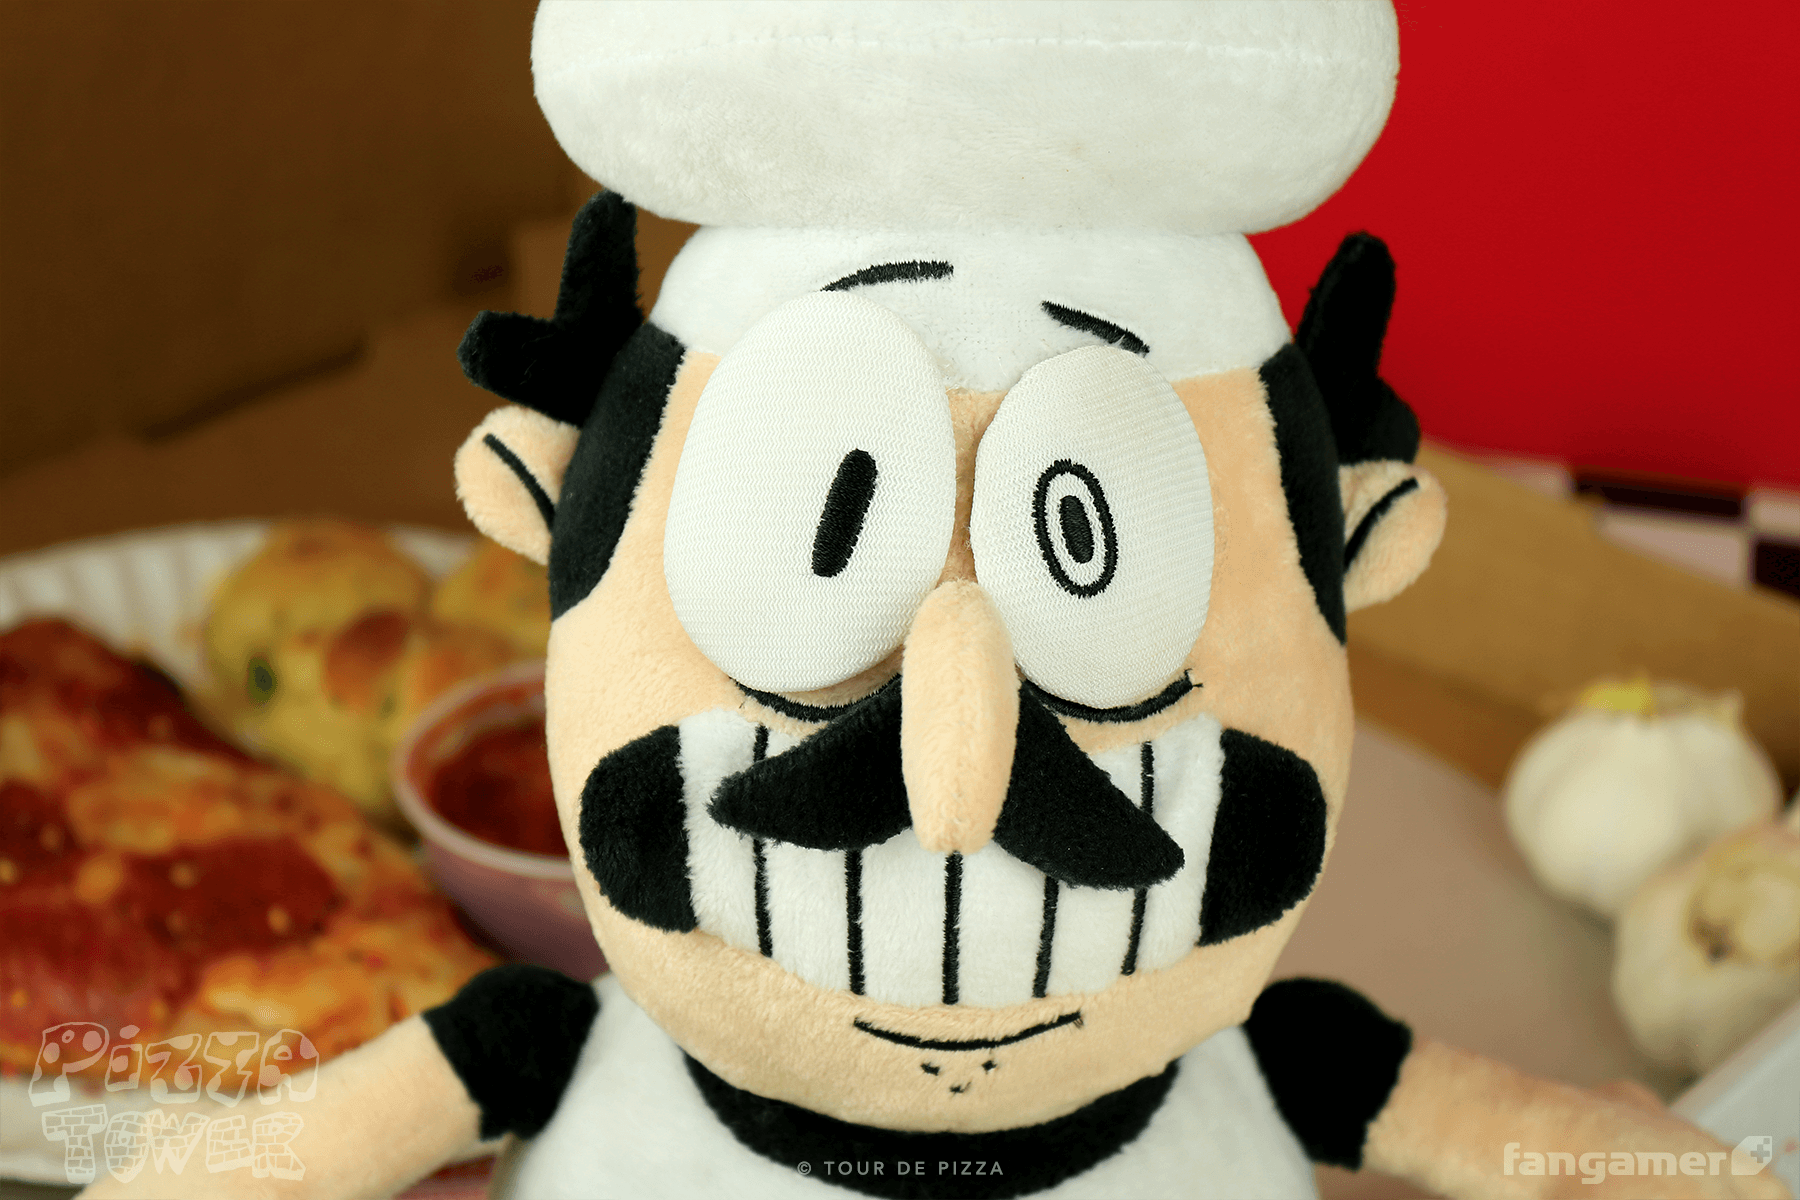 Pizza Tower Cuddly Toy: The Ultimate Comfort Food